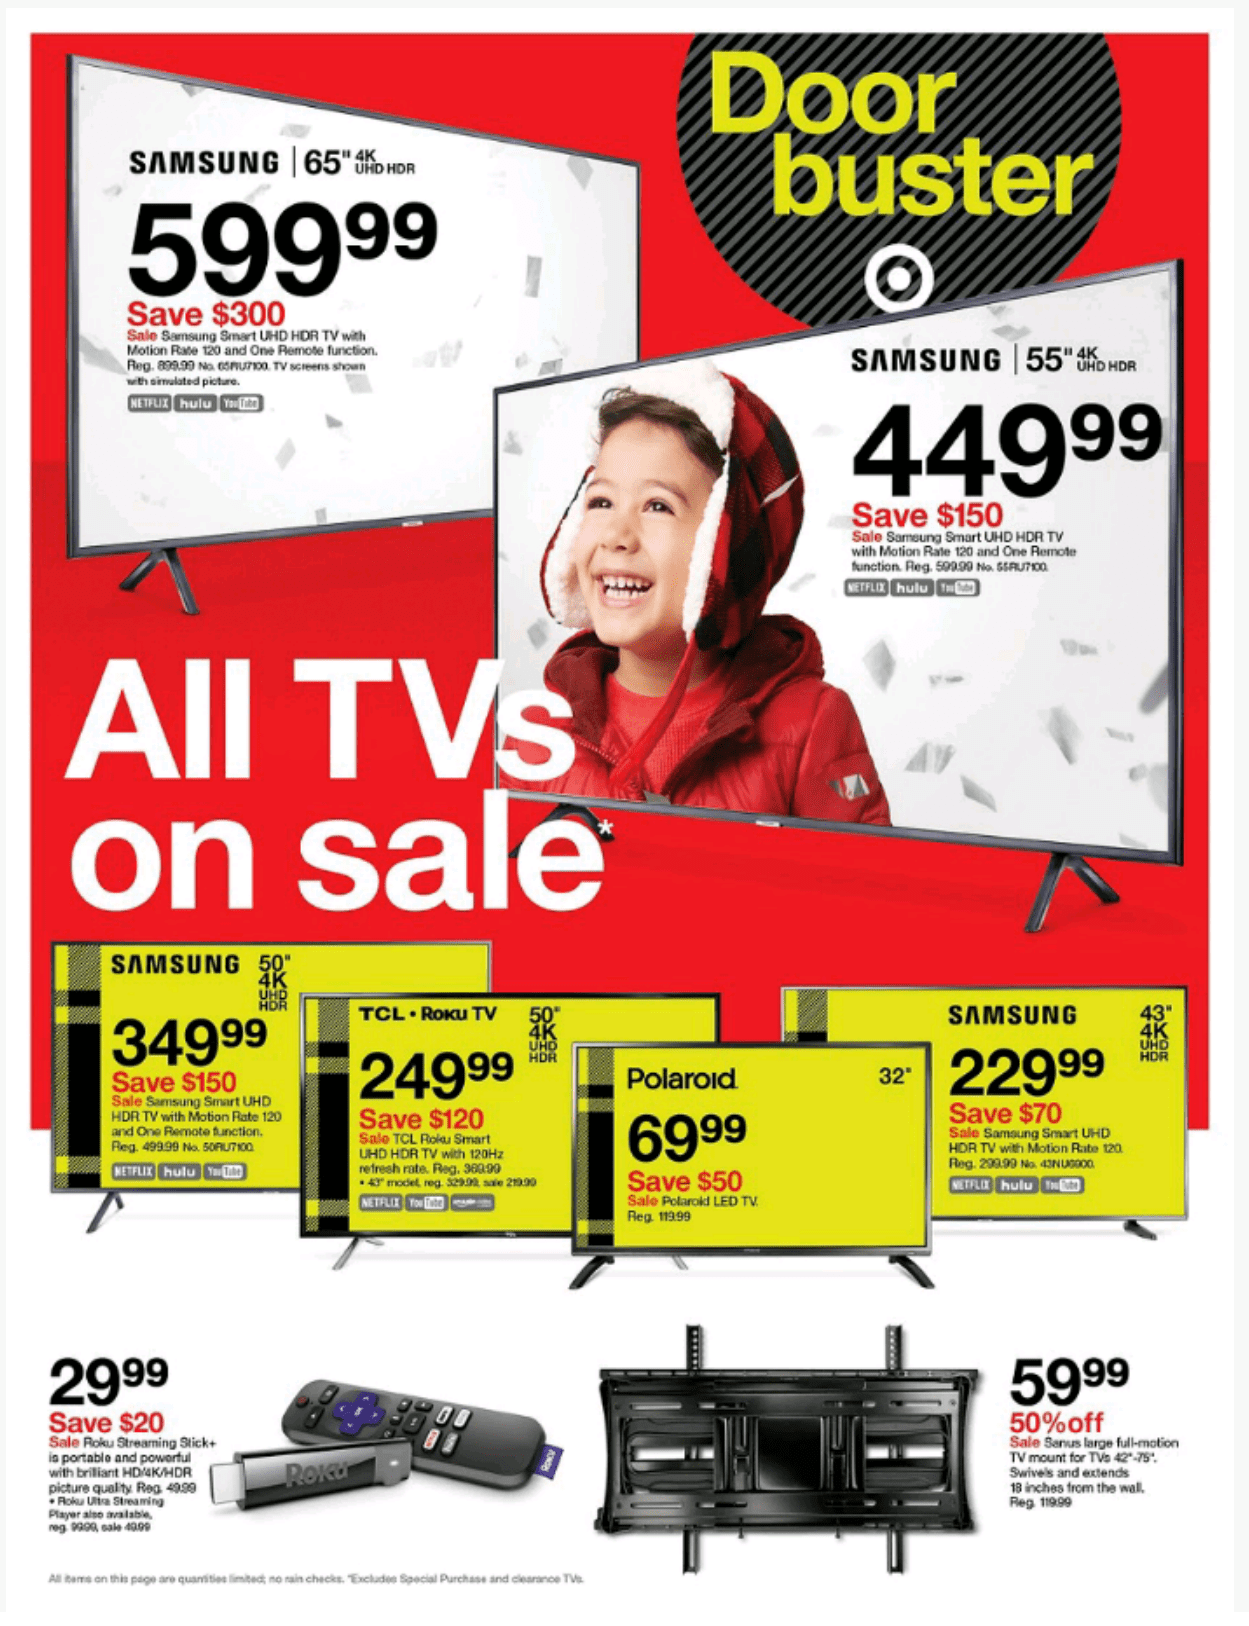 It’s Here! 2019 Target Black Friday Ad Preview - TotallyTarget.com - Will There Still Be Black Friday Deals On Saturday